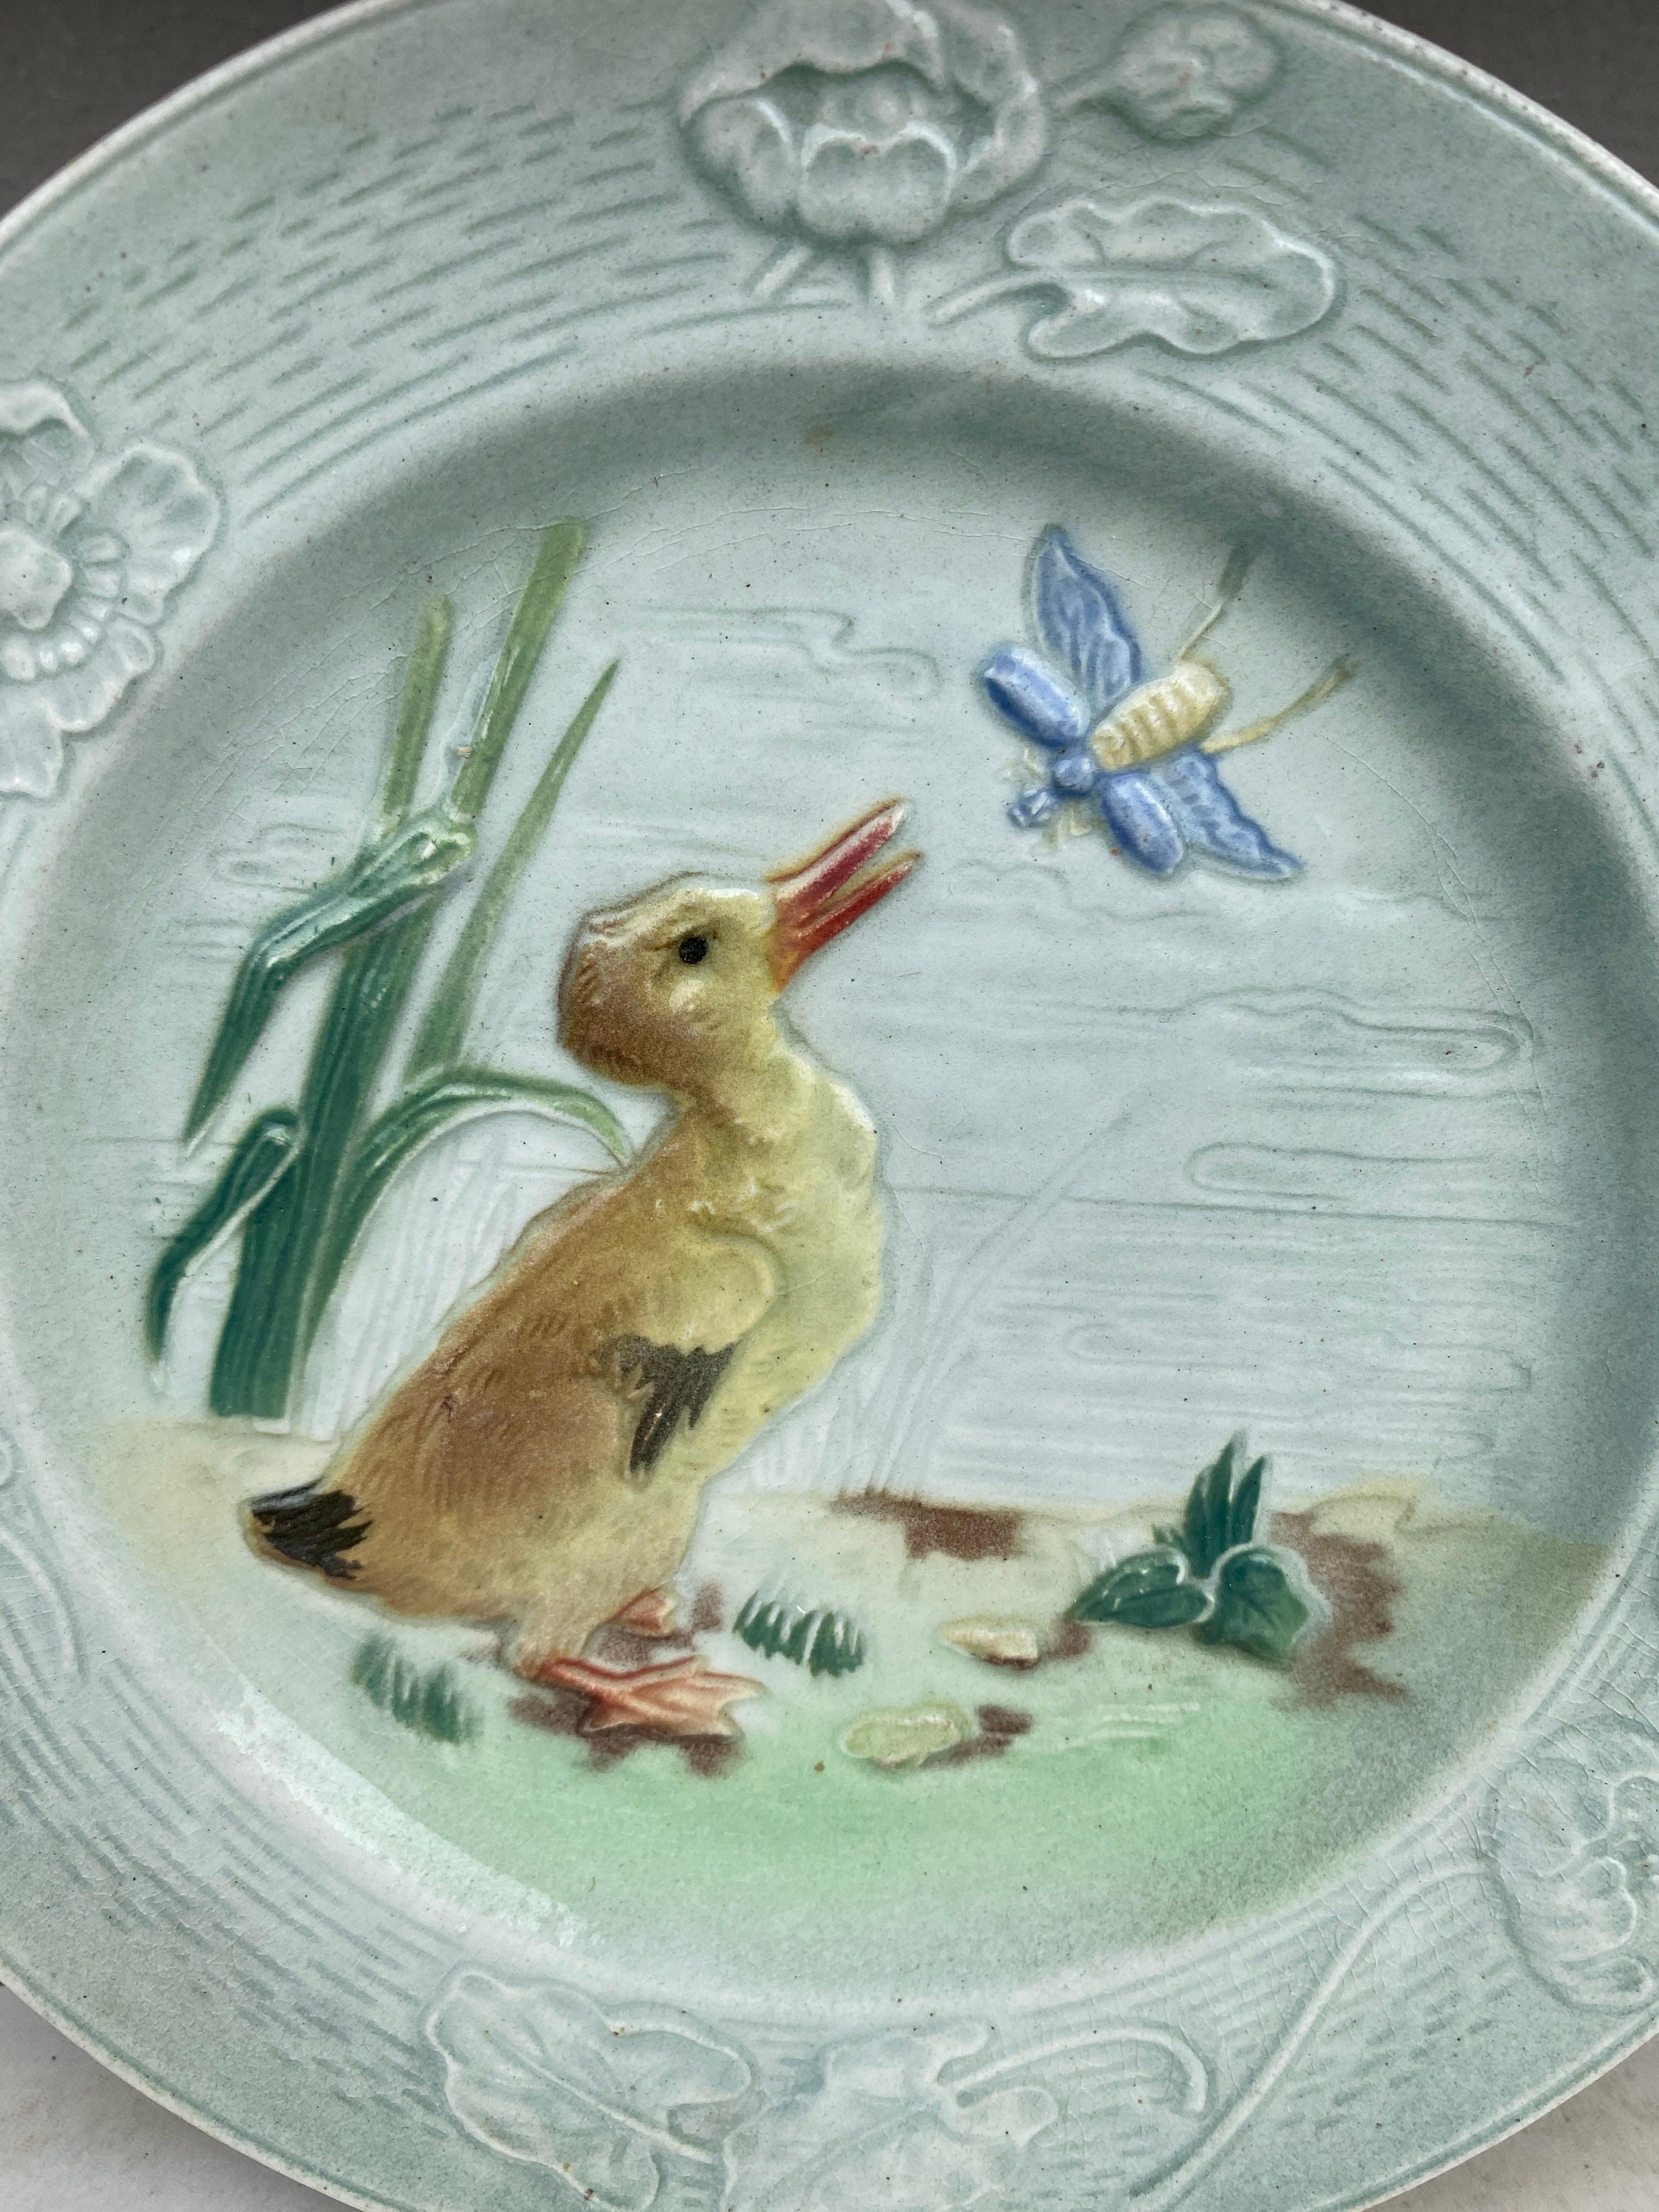 French Majolica Duckling and insect and plate Keller & Guerin Saint Clement circa 1900.
Border with poppies.